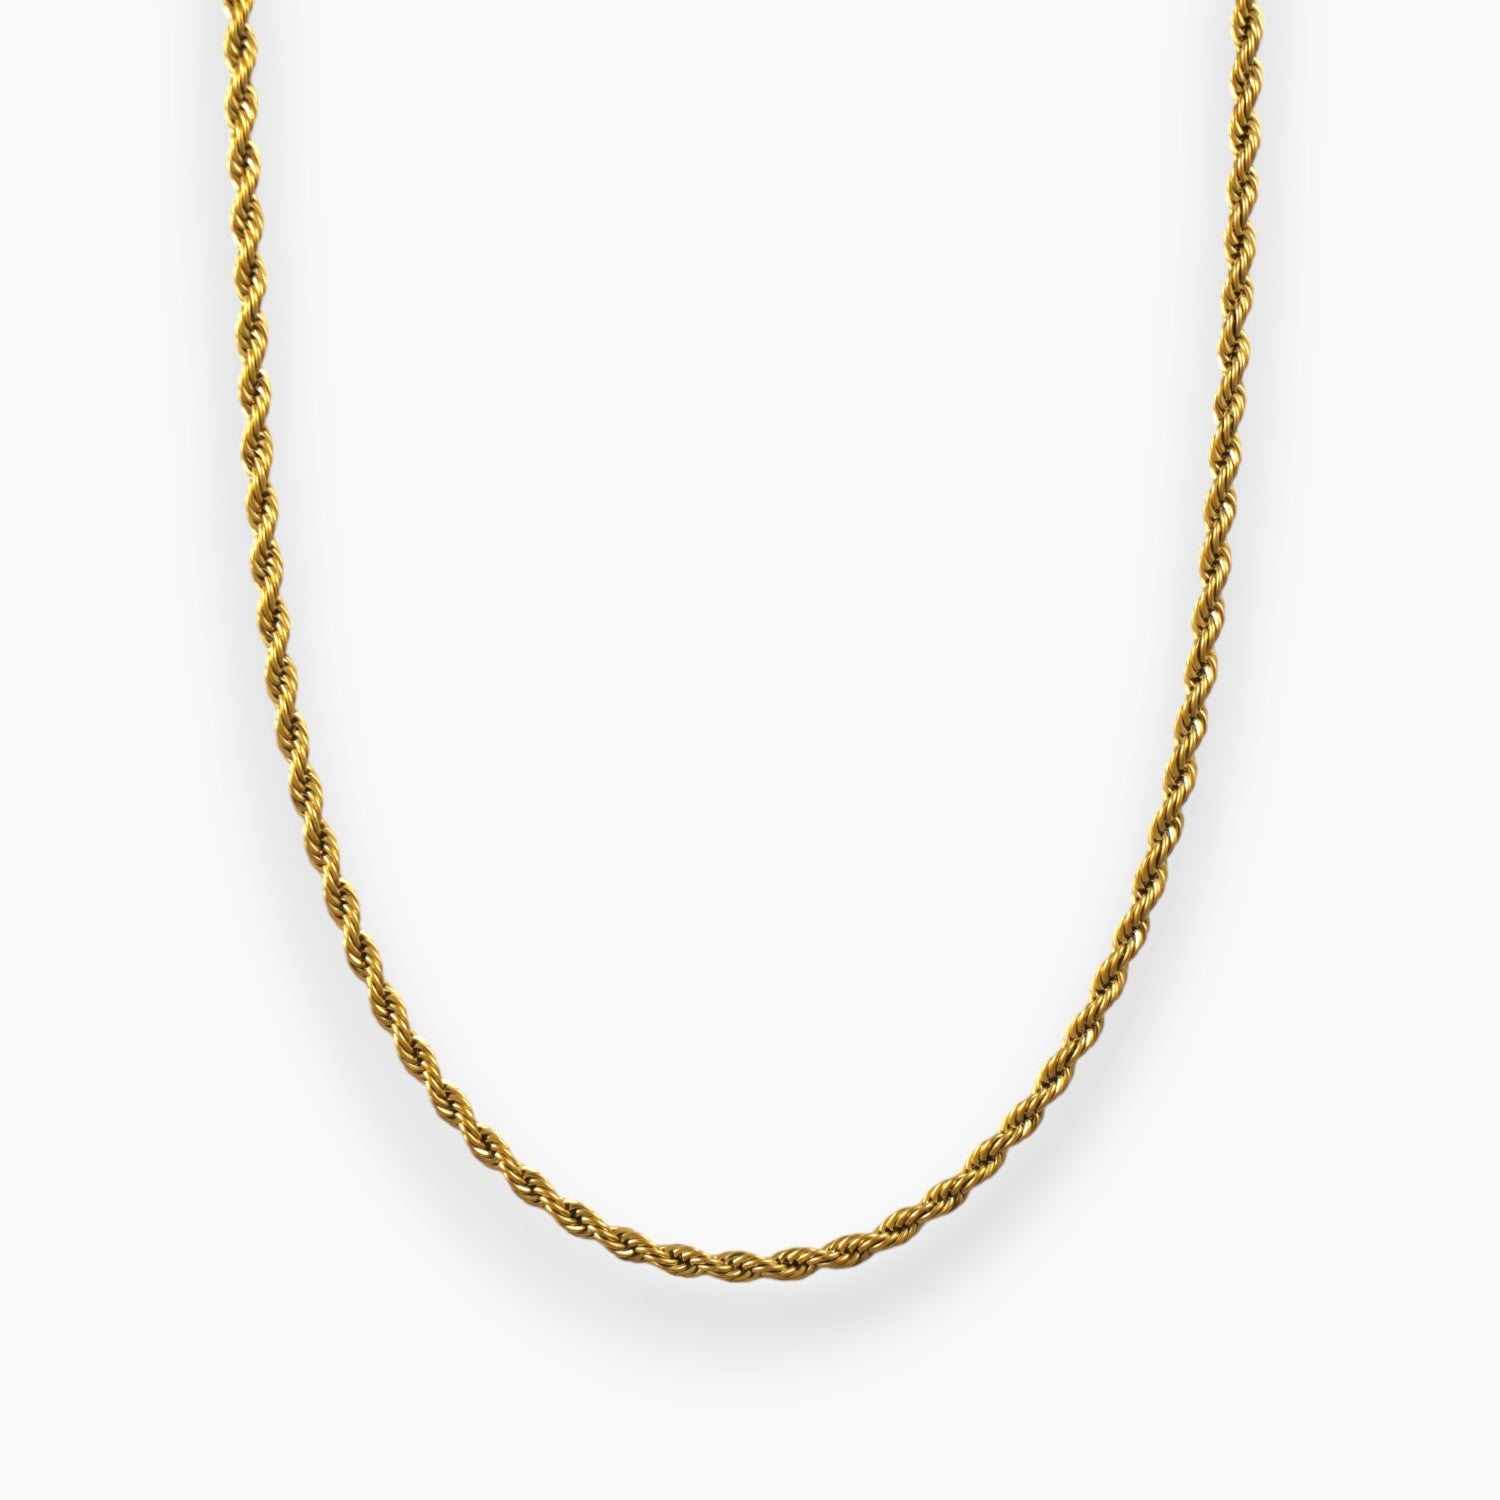 3mm gold rope chain